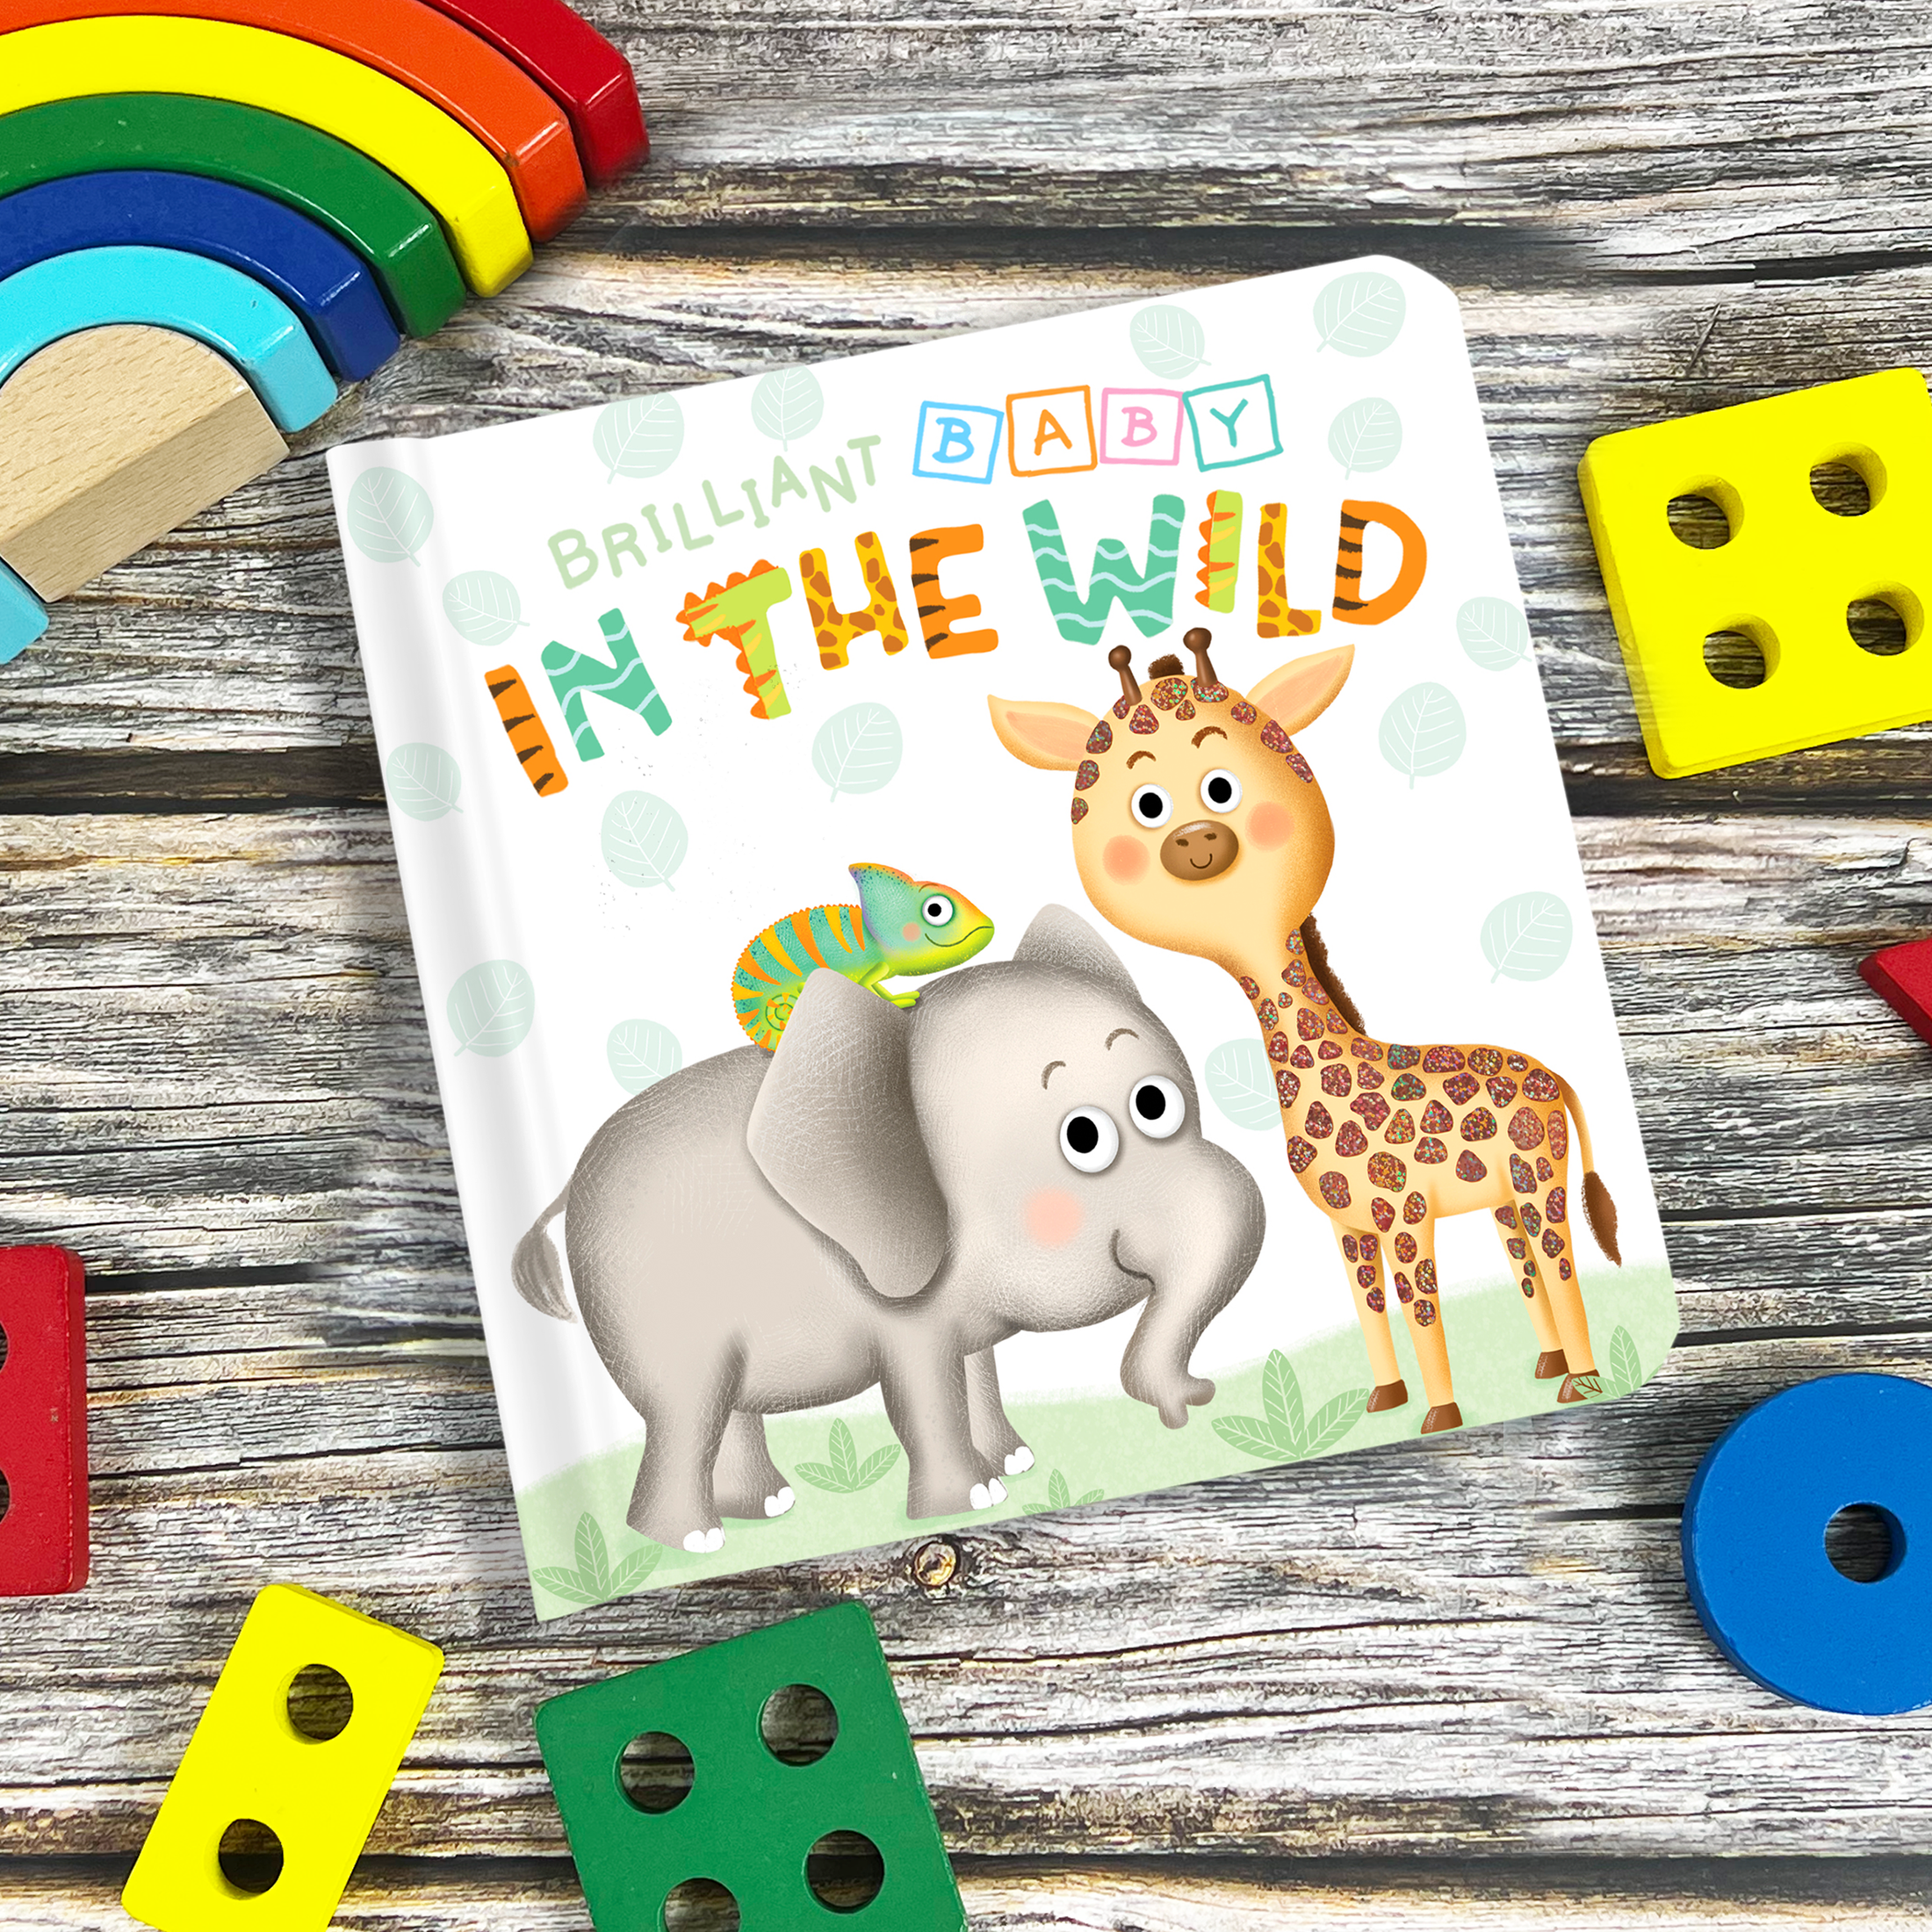 Board Book: Brilliant Baby: In the Wild  - Children's Touch and Feel and Learn Sensory Book